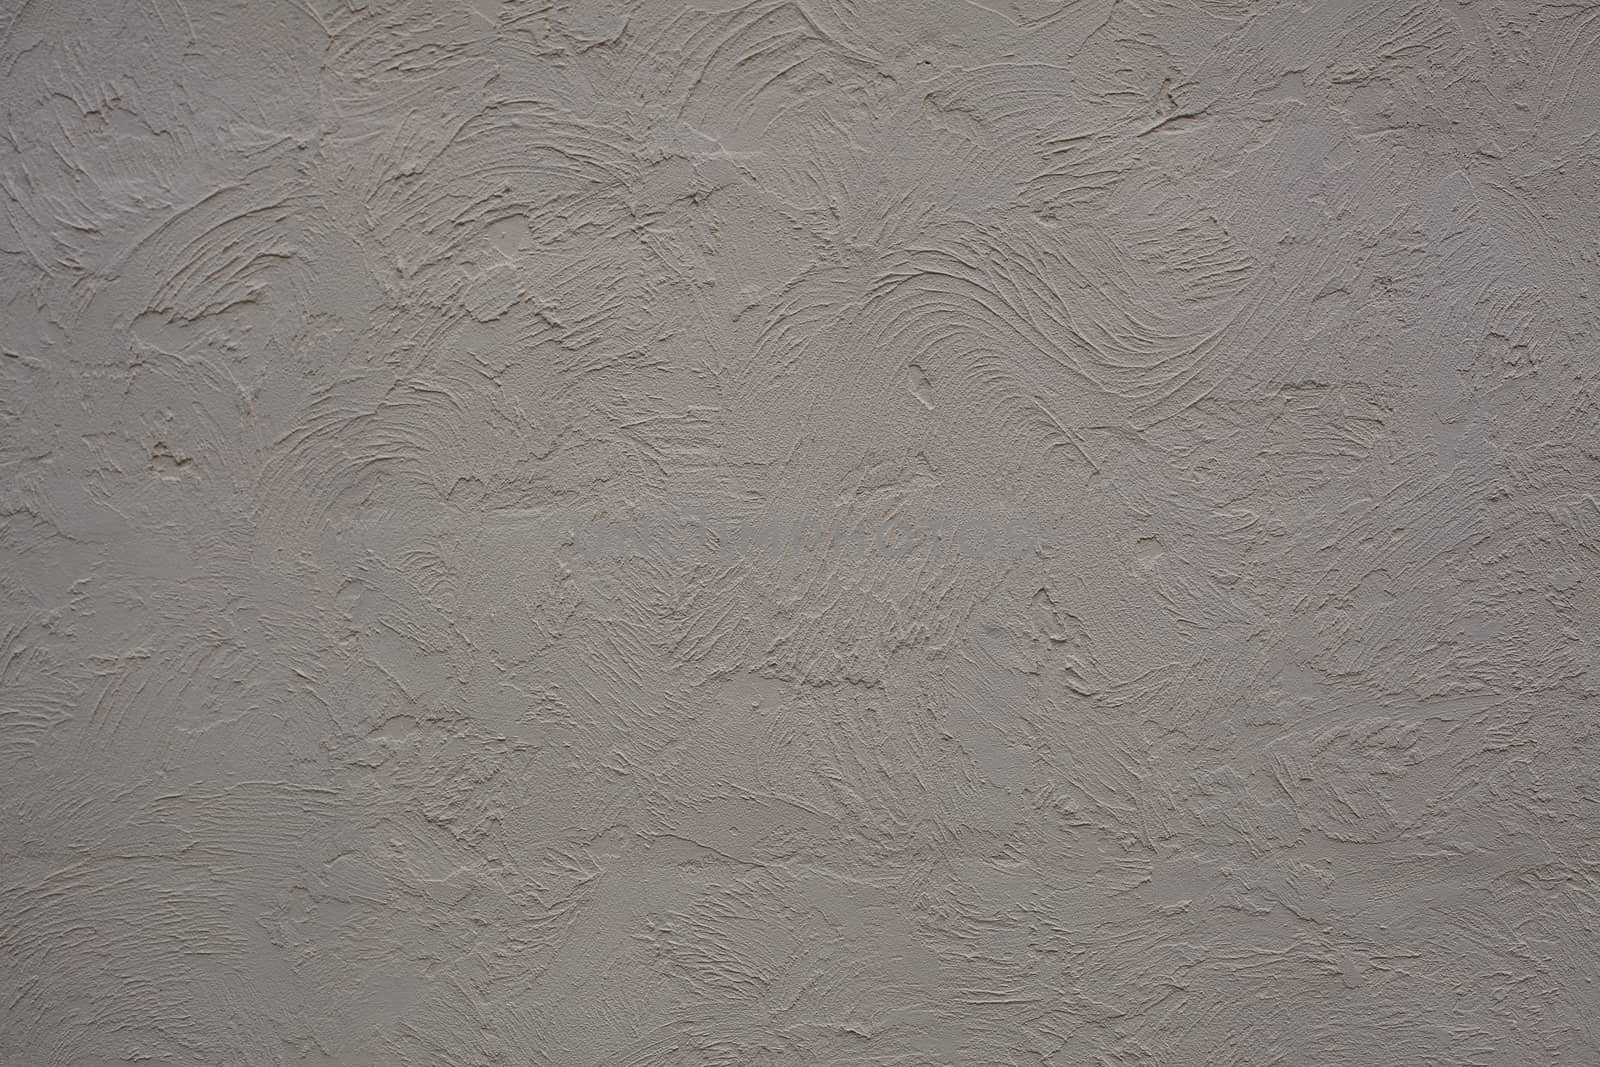 Texture of gray plastered wall